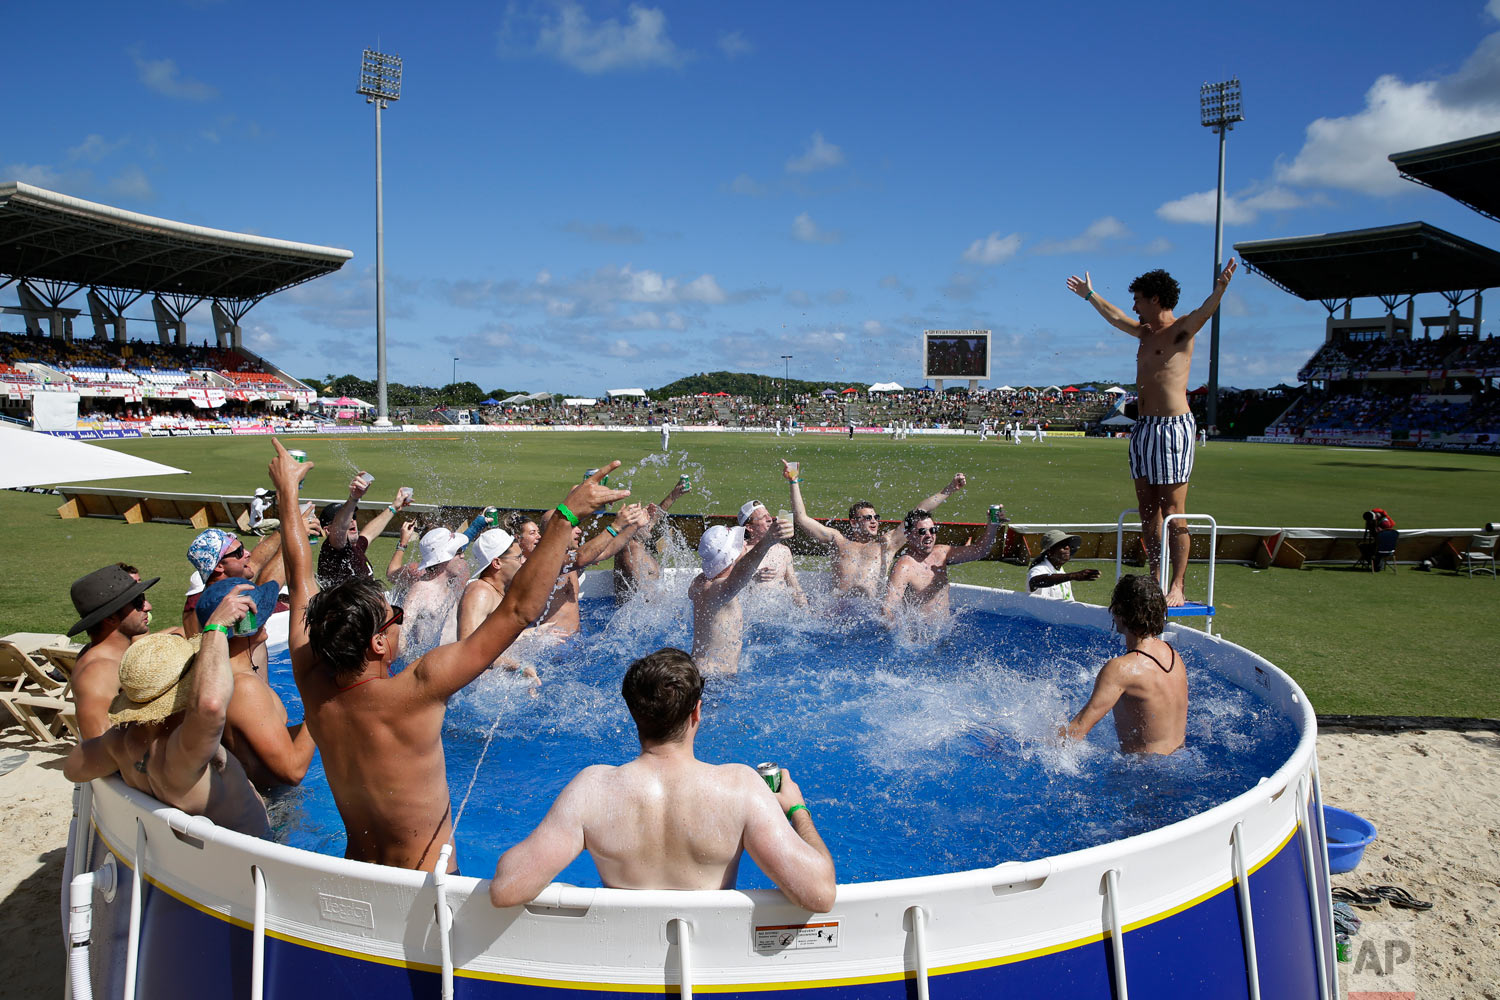  England cricket fans watch the first day of the second Test cricket match against West Indies, from a pool at the Sir Vivian Richards Stadium in North Sound, Antigua and Barbuda, Jan. 31, 2019. (AP Photo/Ricardo Mazalan) 